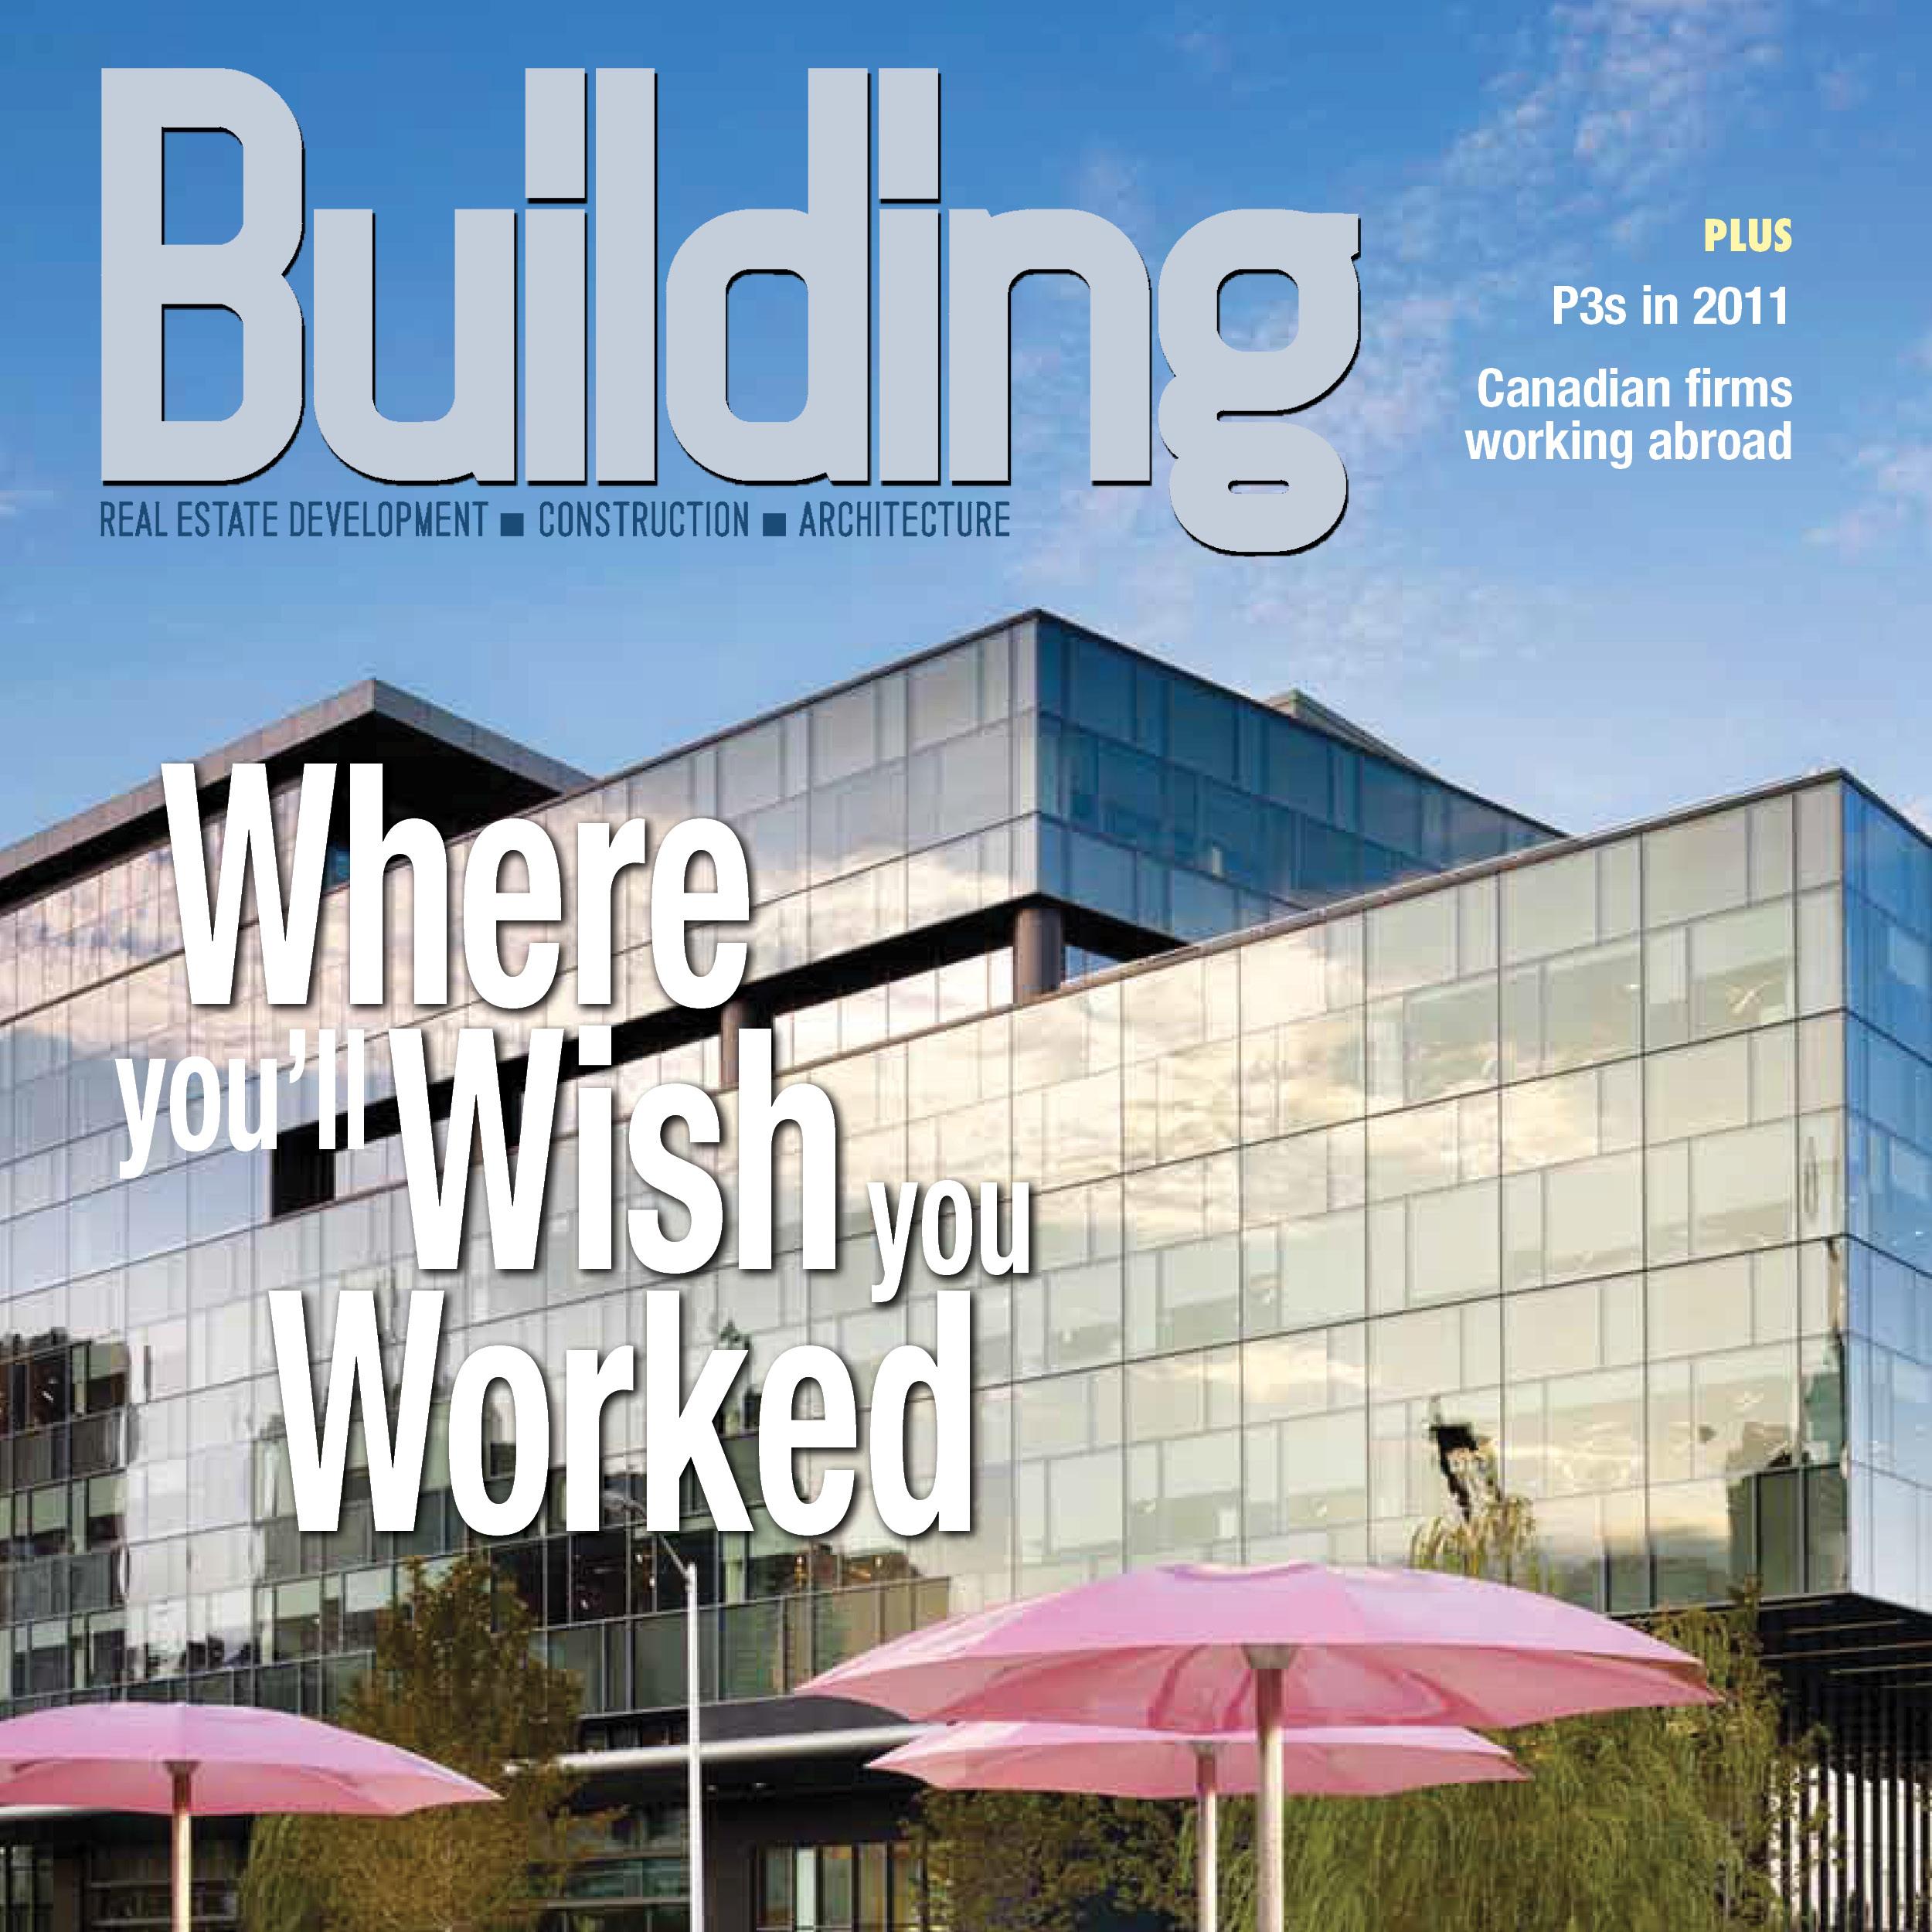 thumbnail image of the cover of Building magazine featuring Corus Quay